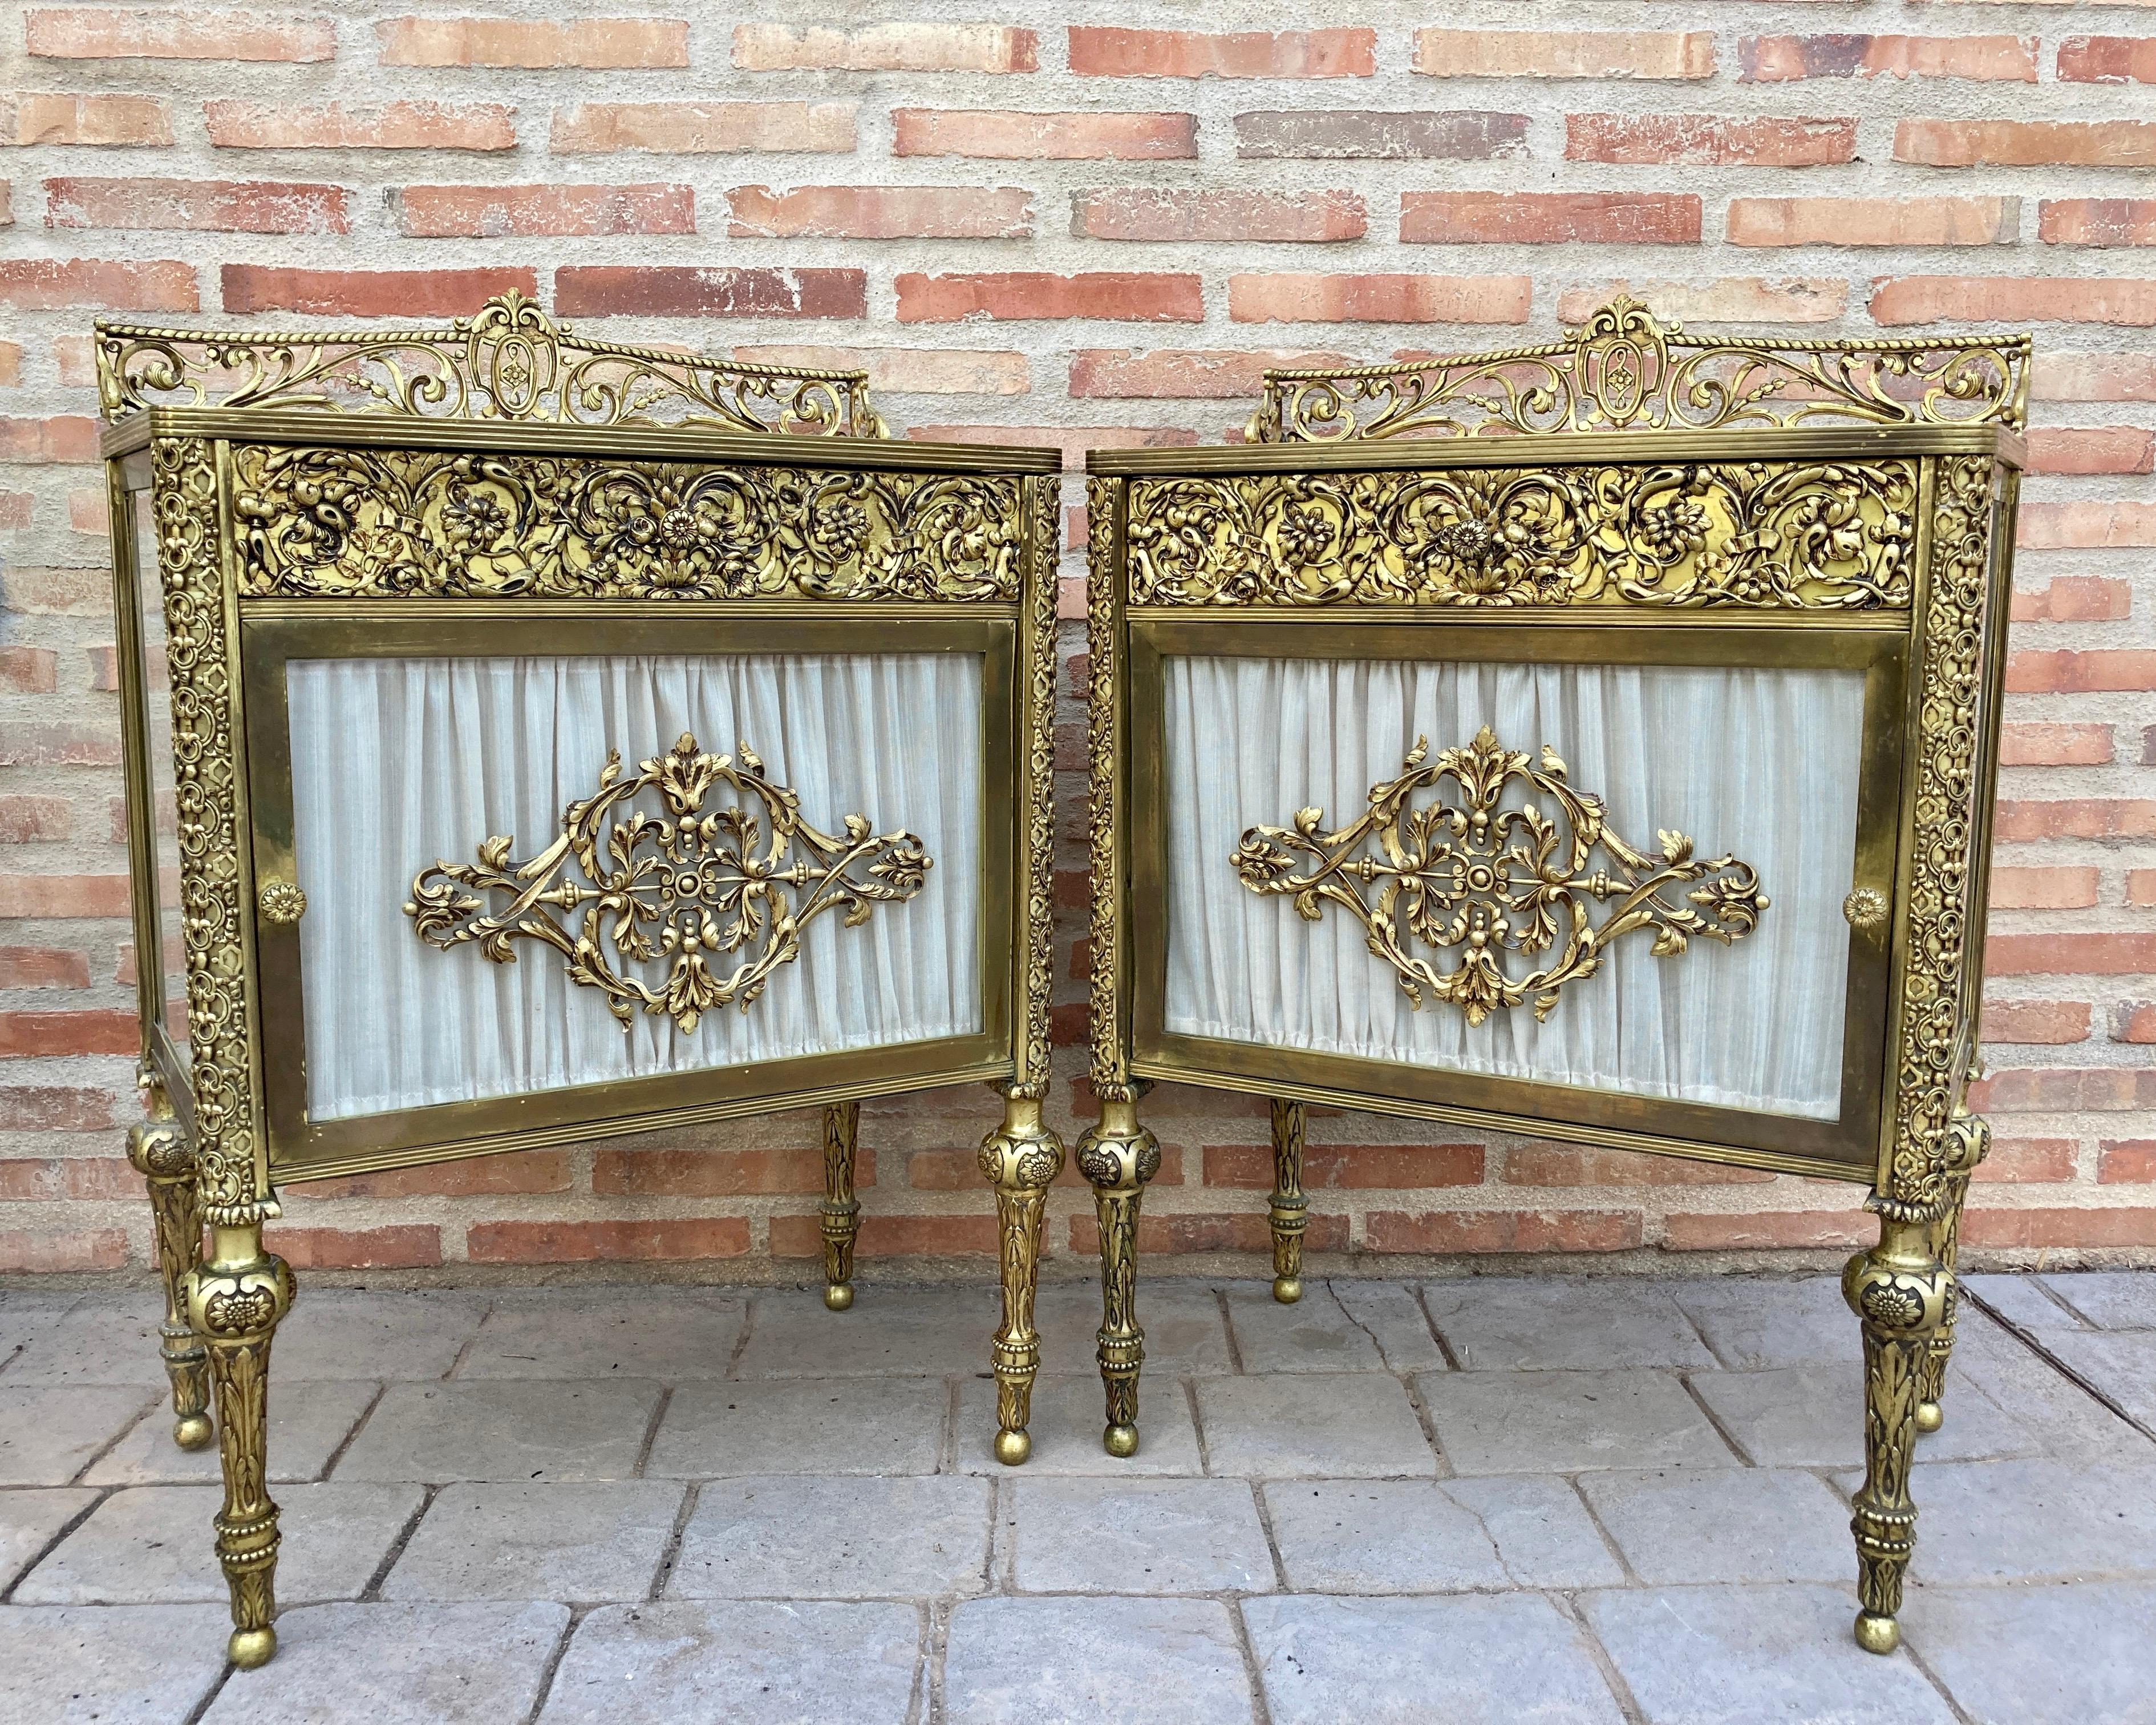 Pair of 19th century bronze and mirror bedside tables with a central brass drawer.

These late 19th century Bronze and Glass Belle Époque Cabinets or Nightstands are simply stunning and built to the highest standard. The bronze is finely mounted